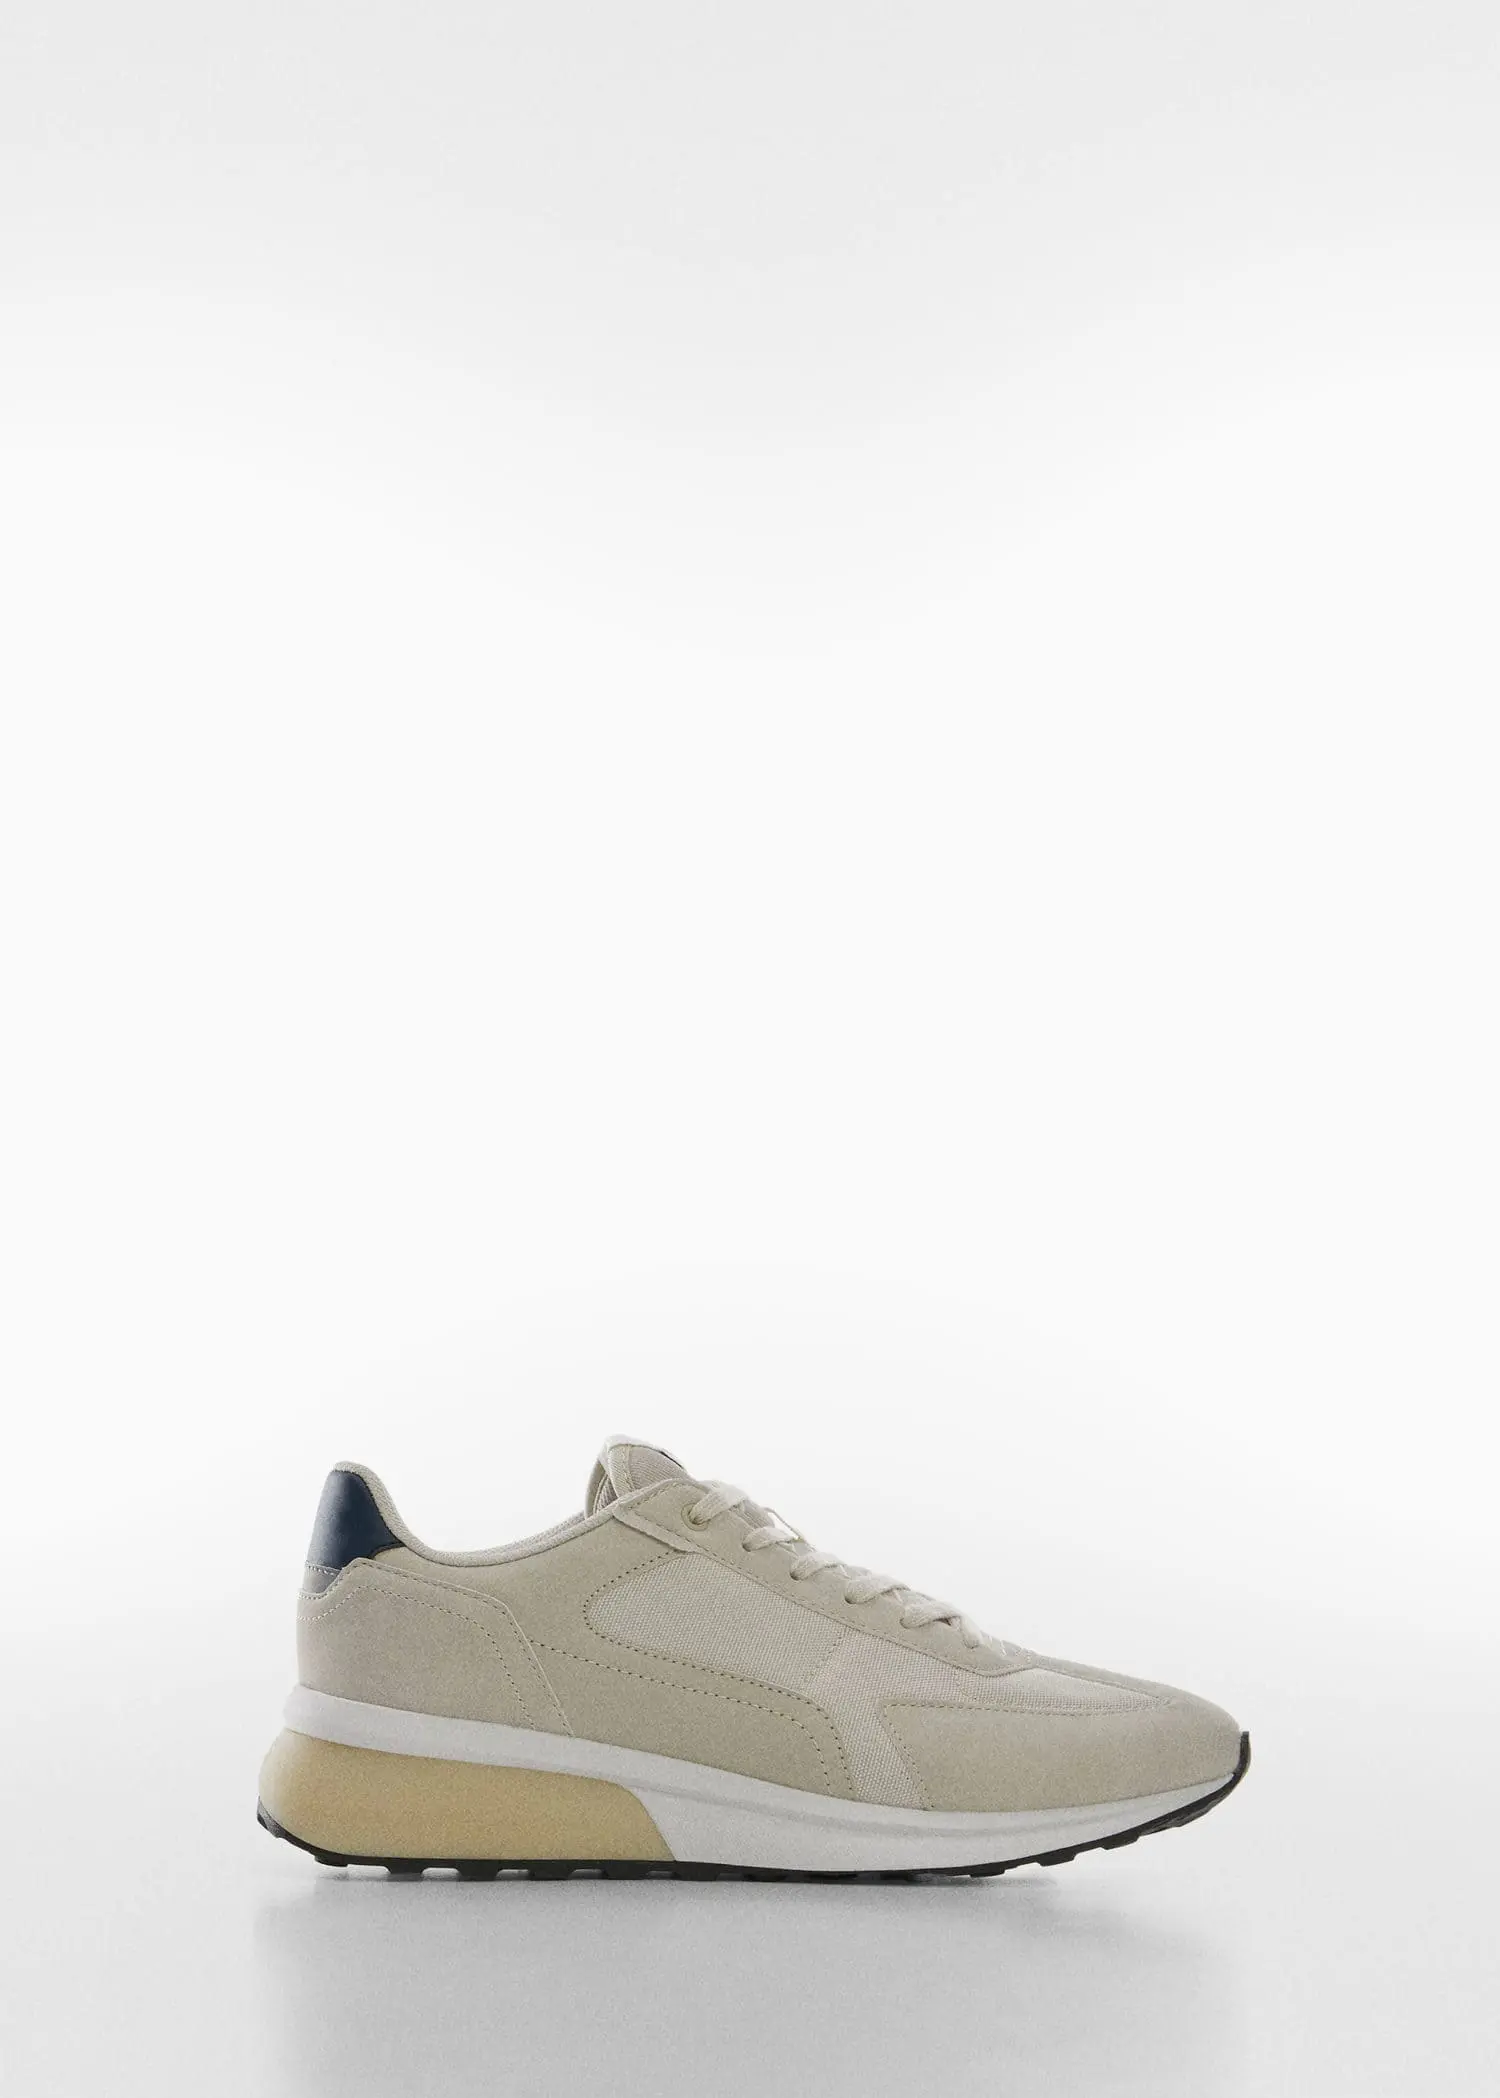 Mango Leather mixed sneakers. a pair of white shoes on a white background 